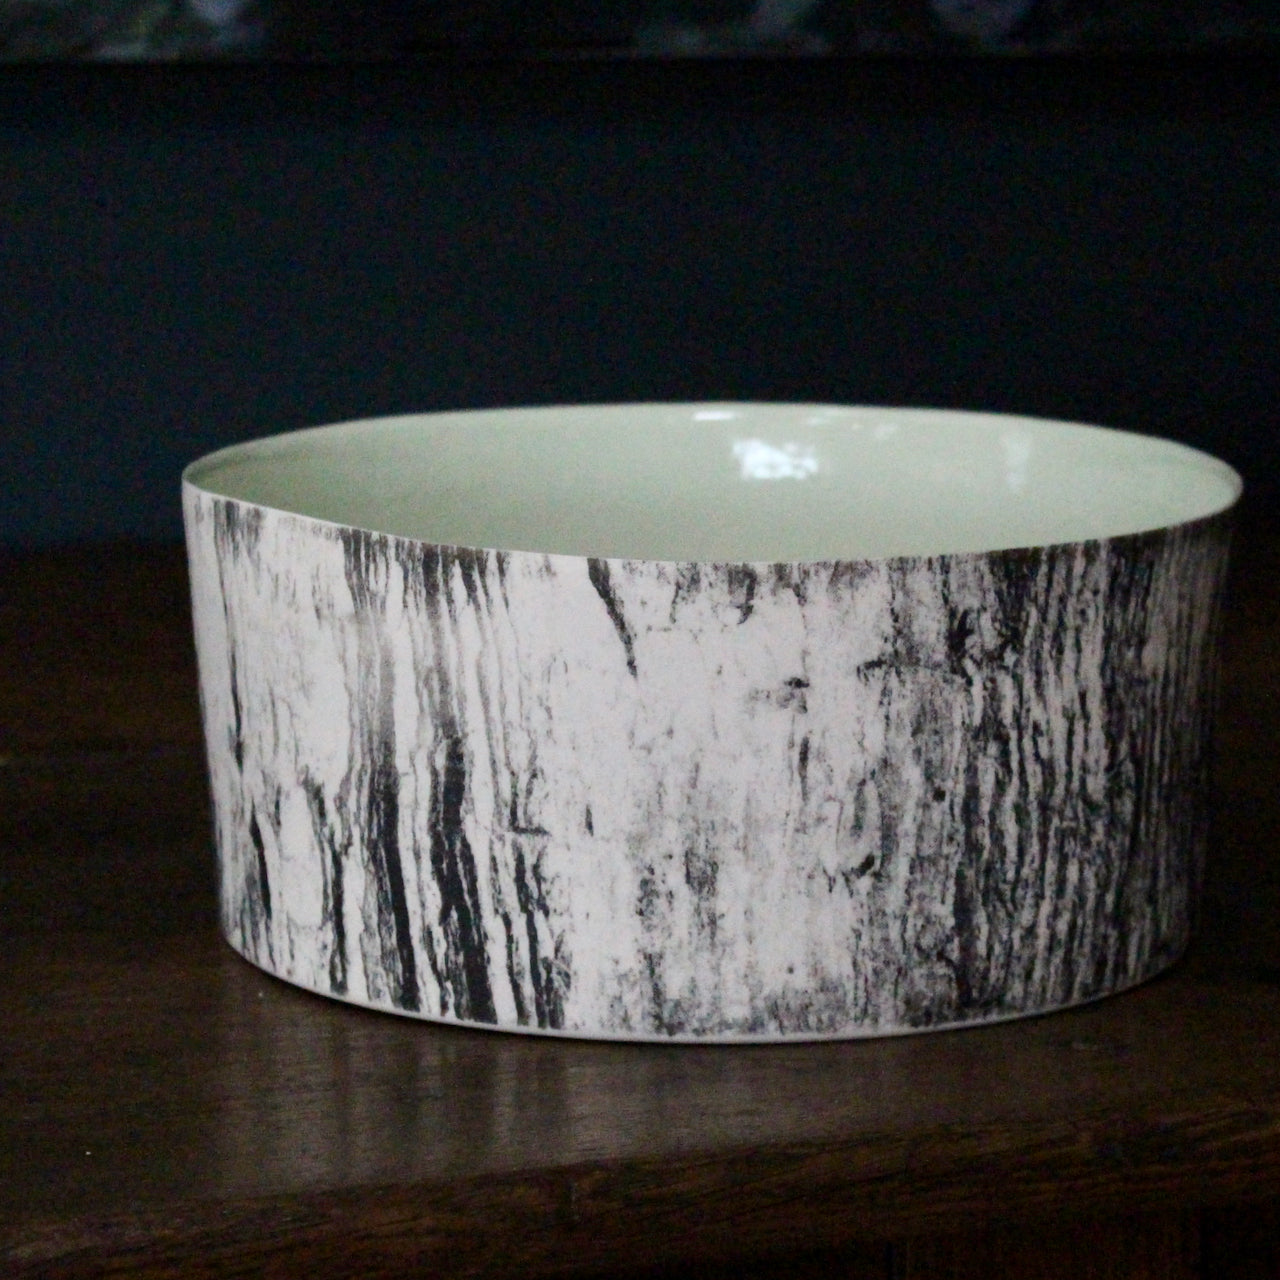 ceramic bowl with a green interior glaze and a black and white tree bark effect on exterior by UK ceramicist Heidi Harrington 